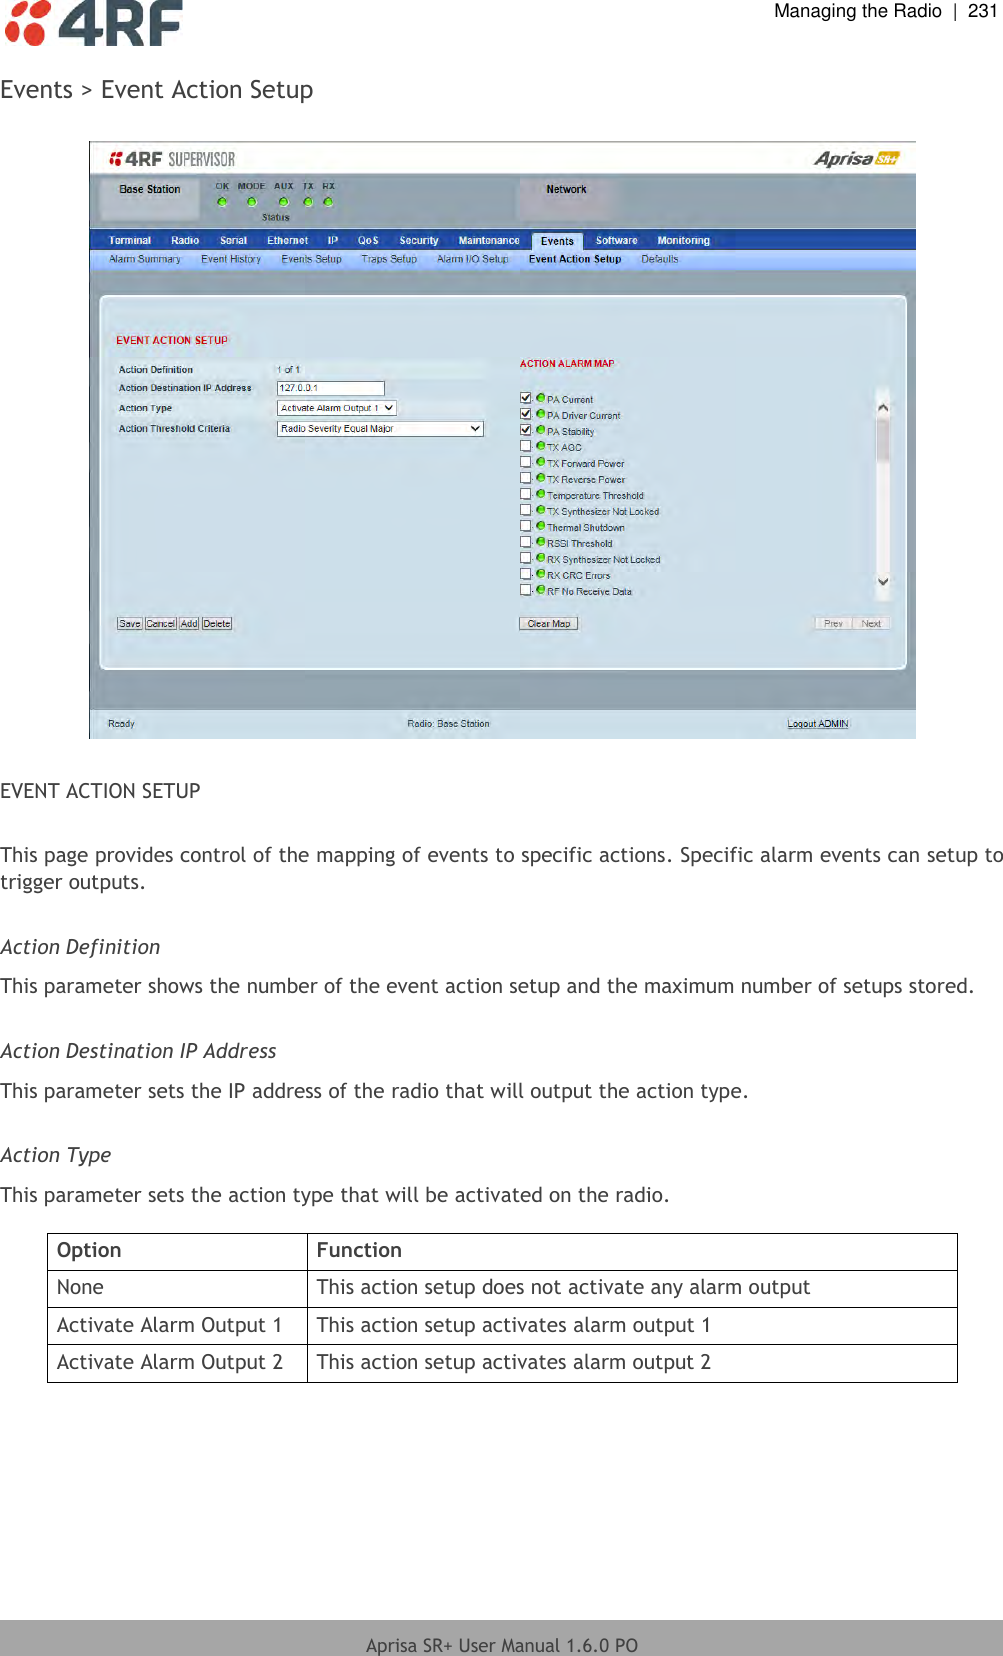  Managing the Radio  |  231  Aprisa SR+ User Manual 1.6.0 PO  Events &gt; Event Action Setup    EVENT ACTION SETUP  This page provides control of the mapping of events to specific actions. Specific alarm events can setup to trigger outputs.  Action Definition This parameter shows the number of the event action setup and the maximum number of setups stored.   Action Destination IP Address This parameter sets the IP address of the radio that will output the action type.   Action Type This parameter sets the action type that will be activated on the radio.  Option Function None This action setup does not activate any alarm output Activate Alarm Output 1 This action setup activates alarm output 1 Activate Alarm Output 2 This action setup activates alarm output 2  